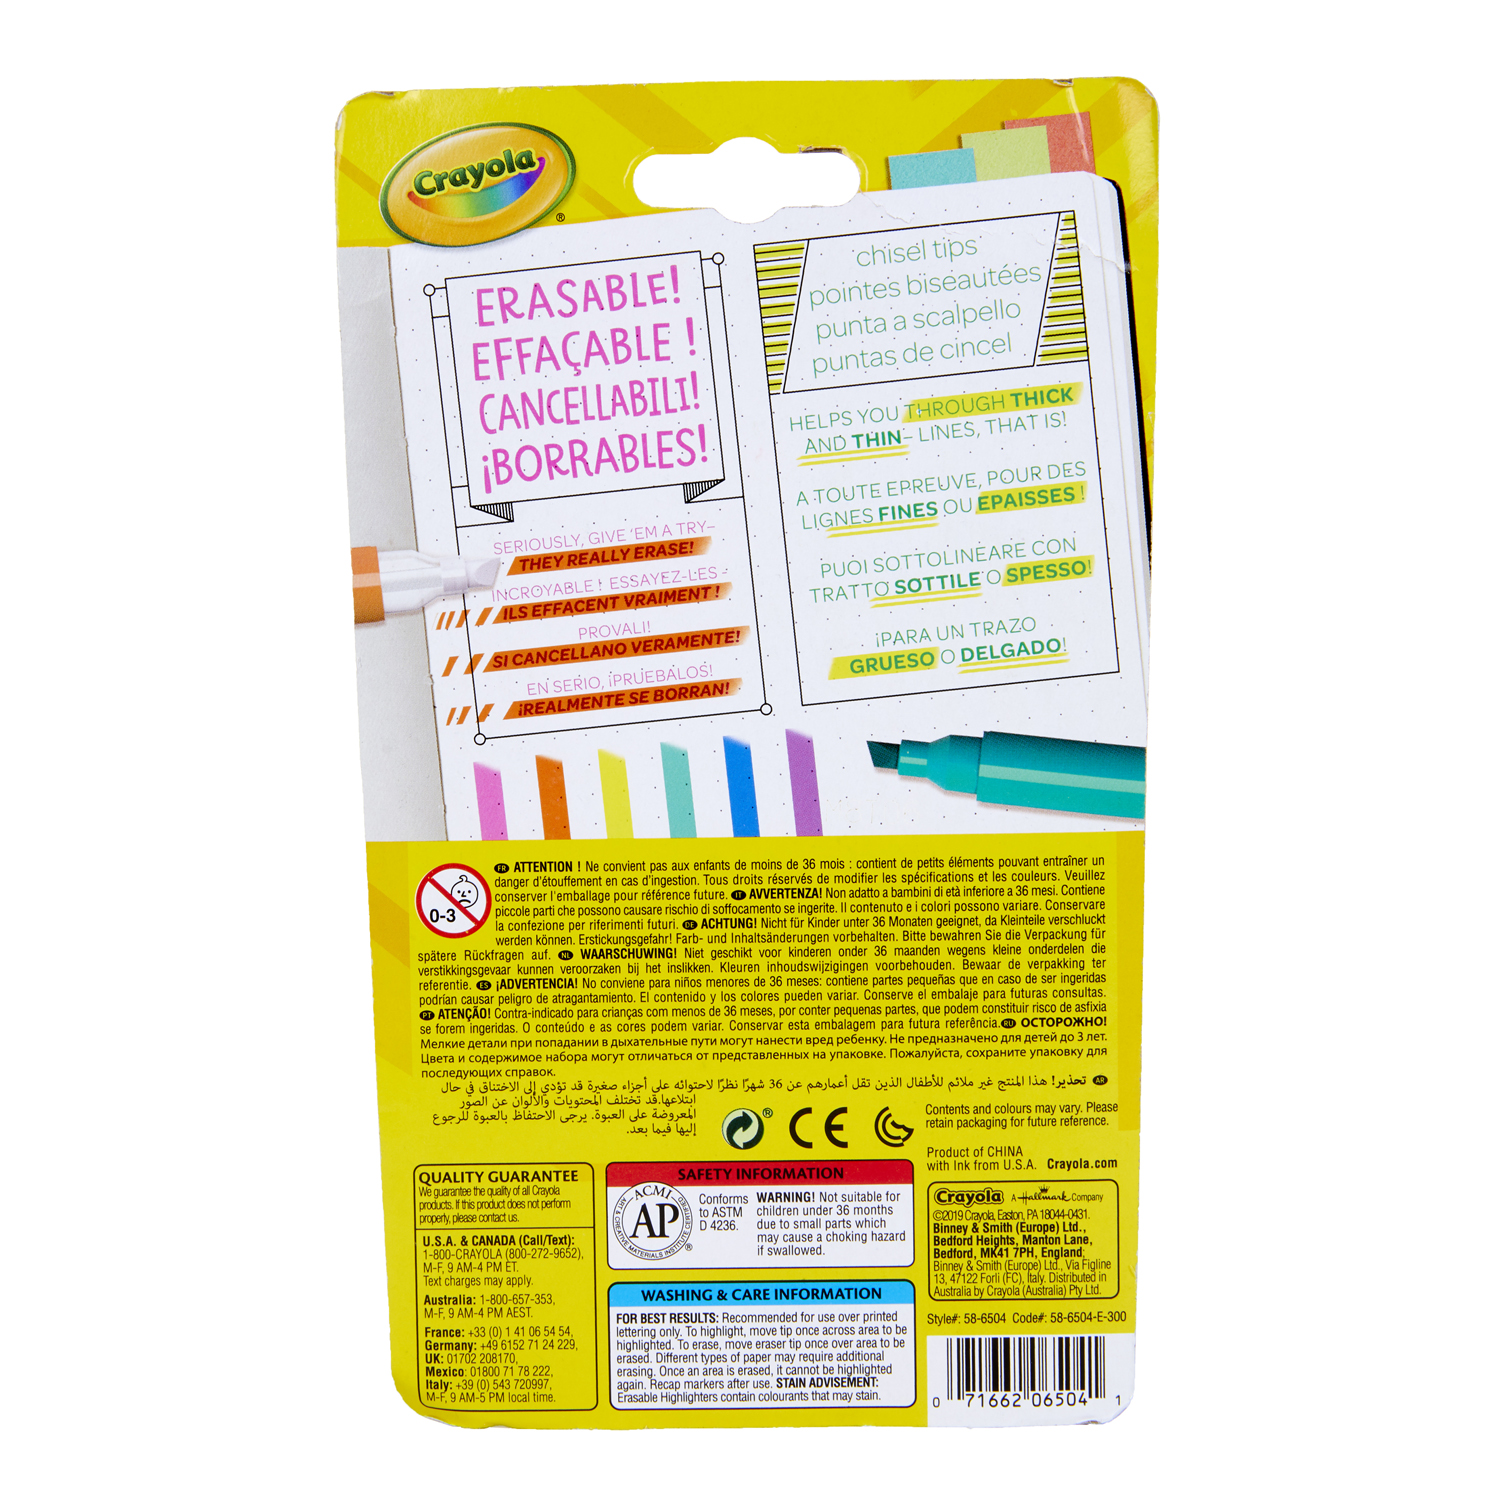 Take Note Dual Tip Highlighter Pens, 6 Count, Crayola.com